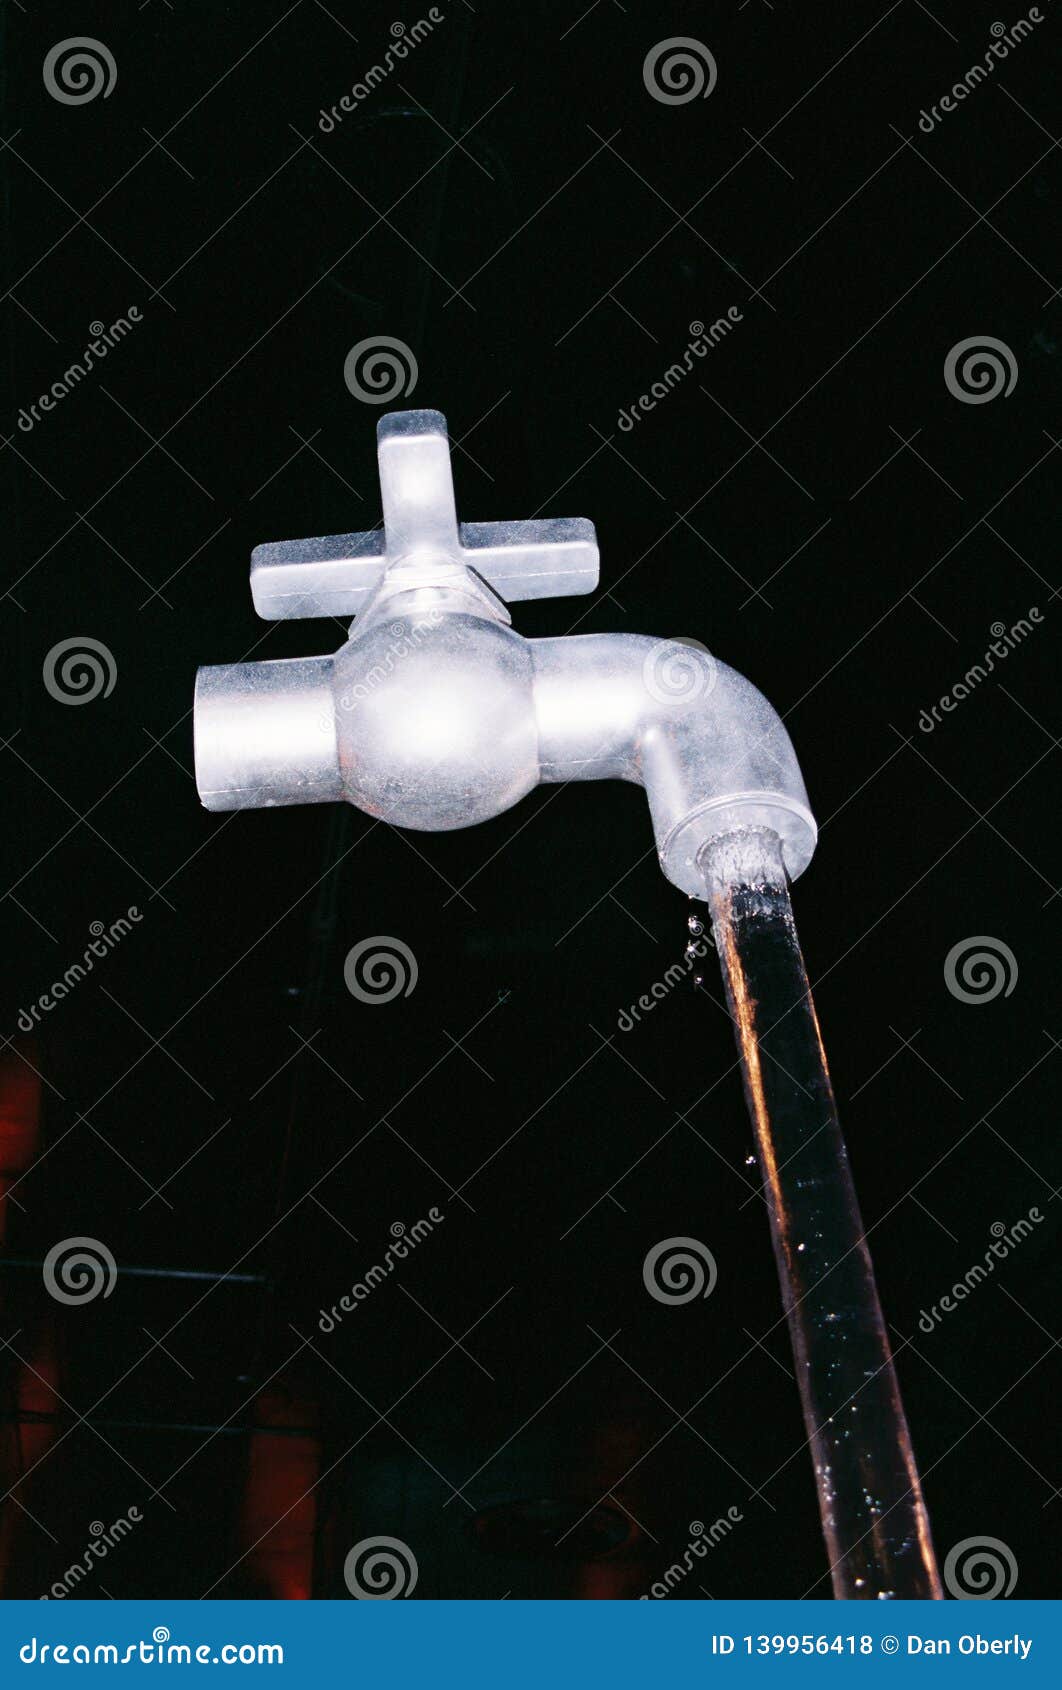 The Floating Faucet Stock Photo Image Of Faucet Silver 139956418